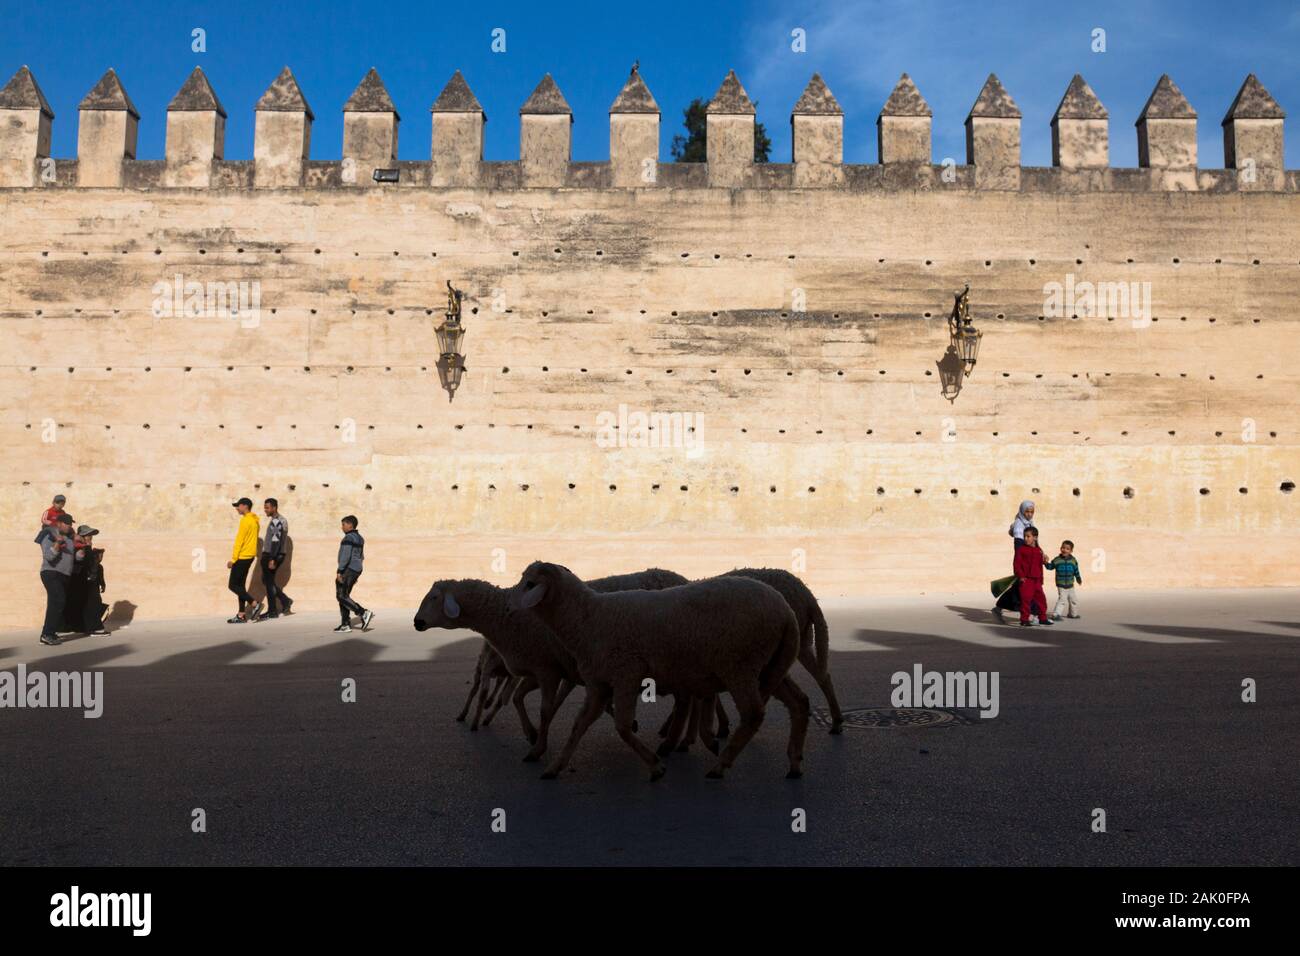 Pedestrians and flock of sheep in scenery of crenellated rammed earth city walls in area of Bab Mechouar and Bab Dekkakin in Fes (Fez), Morocco Stock Photo